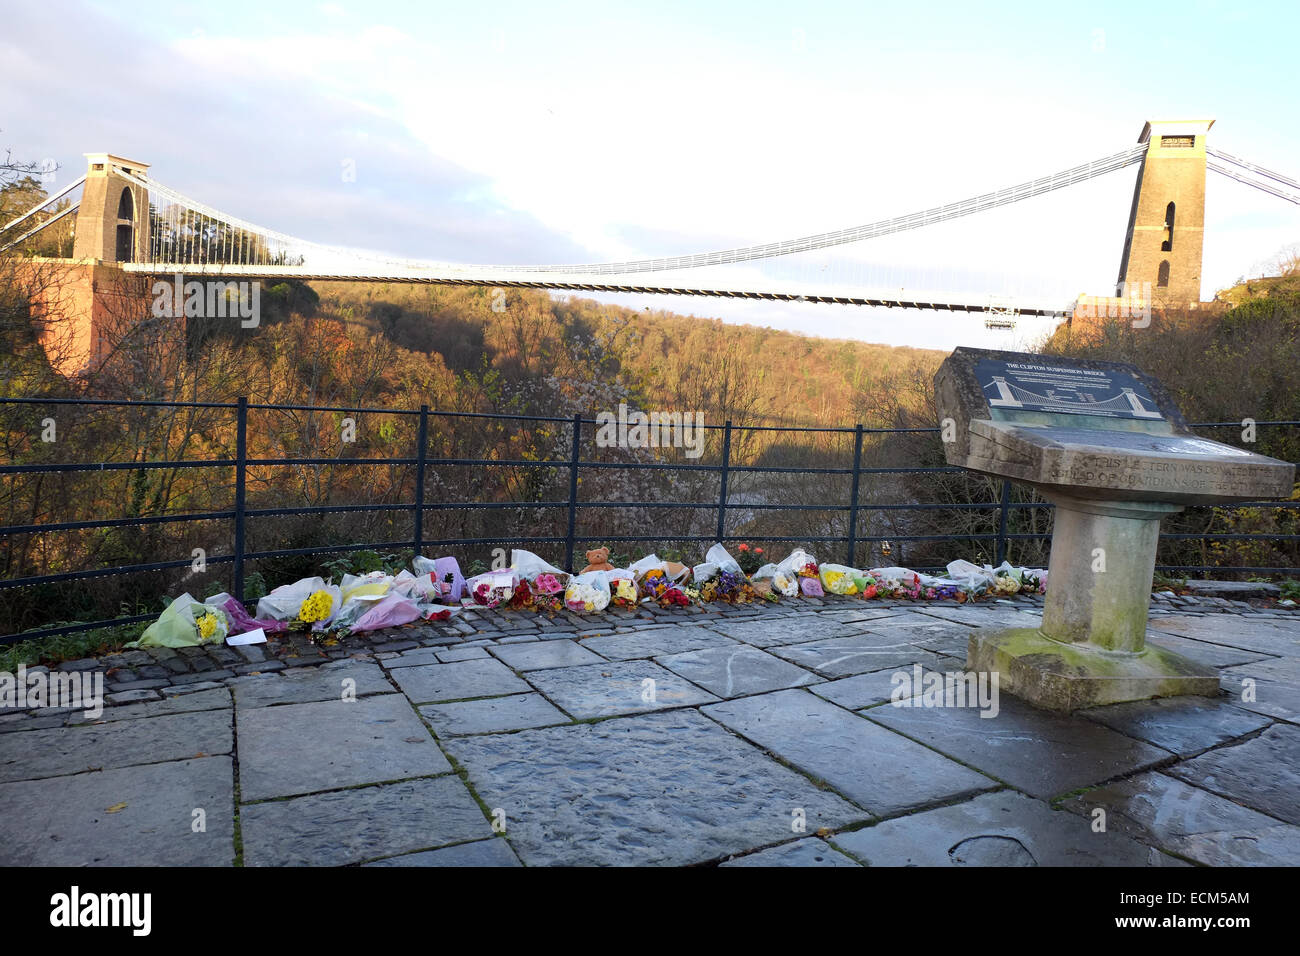 Flowers left following the death of death Charlotte Bevan and her 3 day old baby Zaani on 4th Dec, picture 16th December 2014 Stock Photo